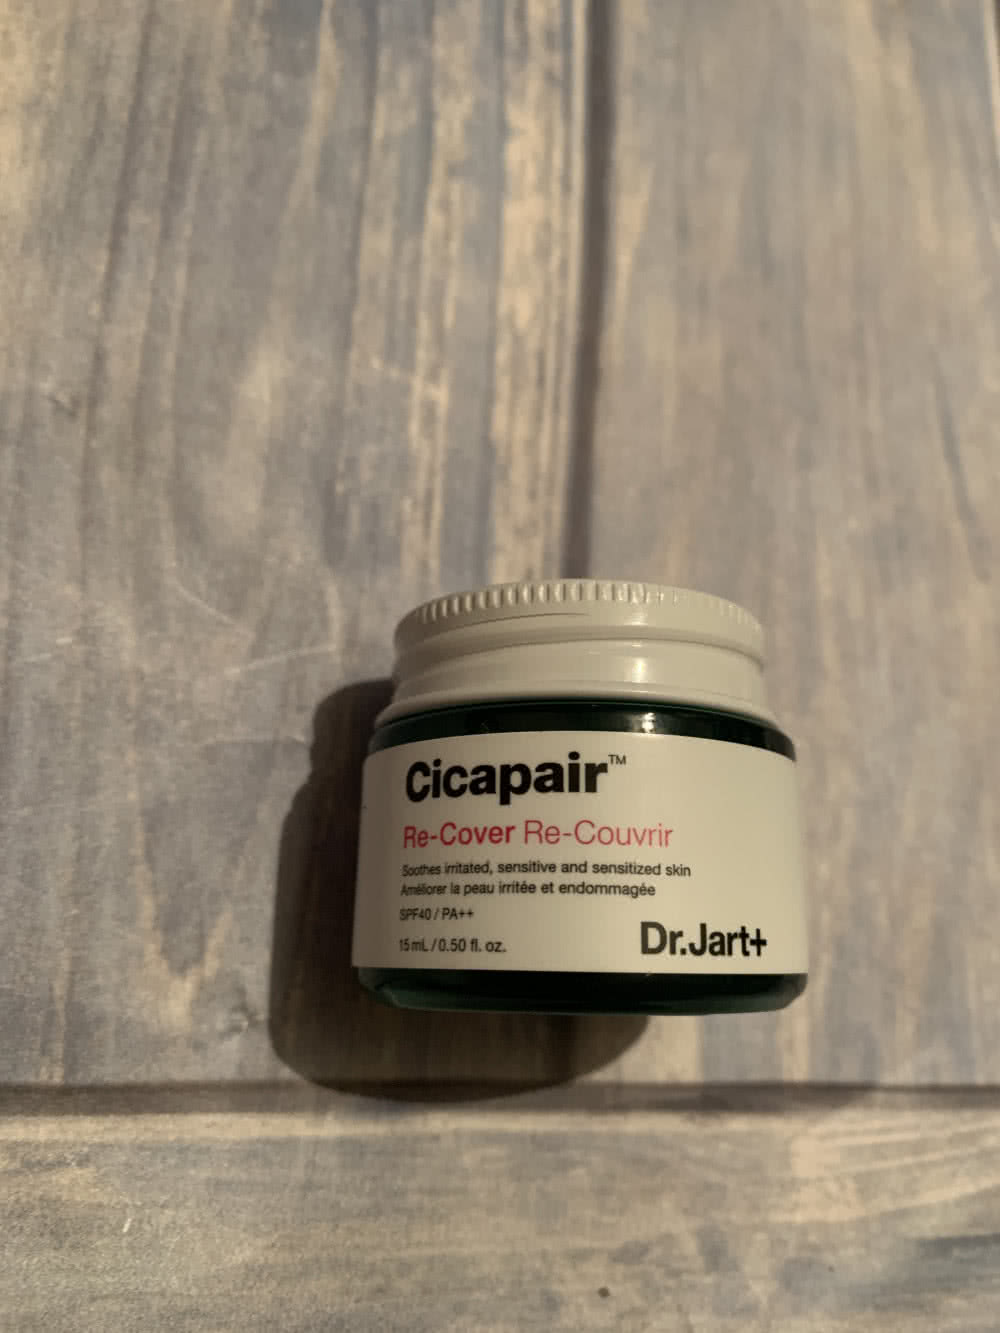 Dr.Jart, Cicapair Re-cover SPF 40 PA++, 15ml